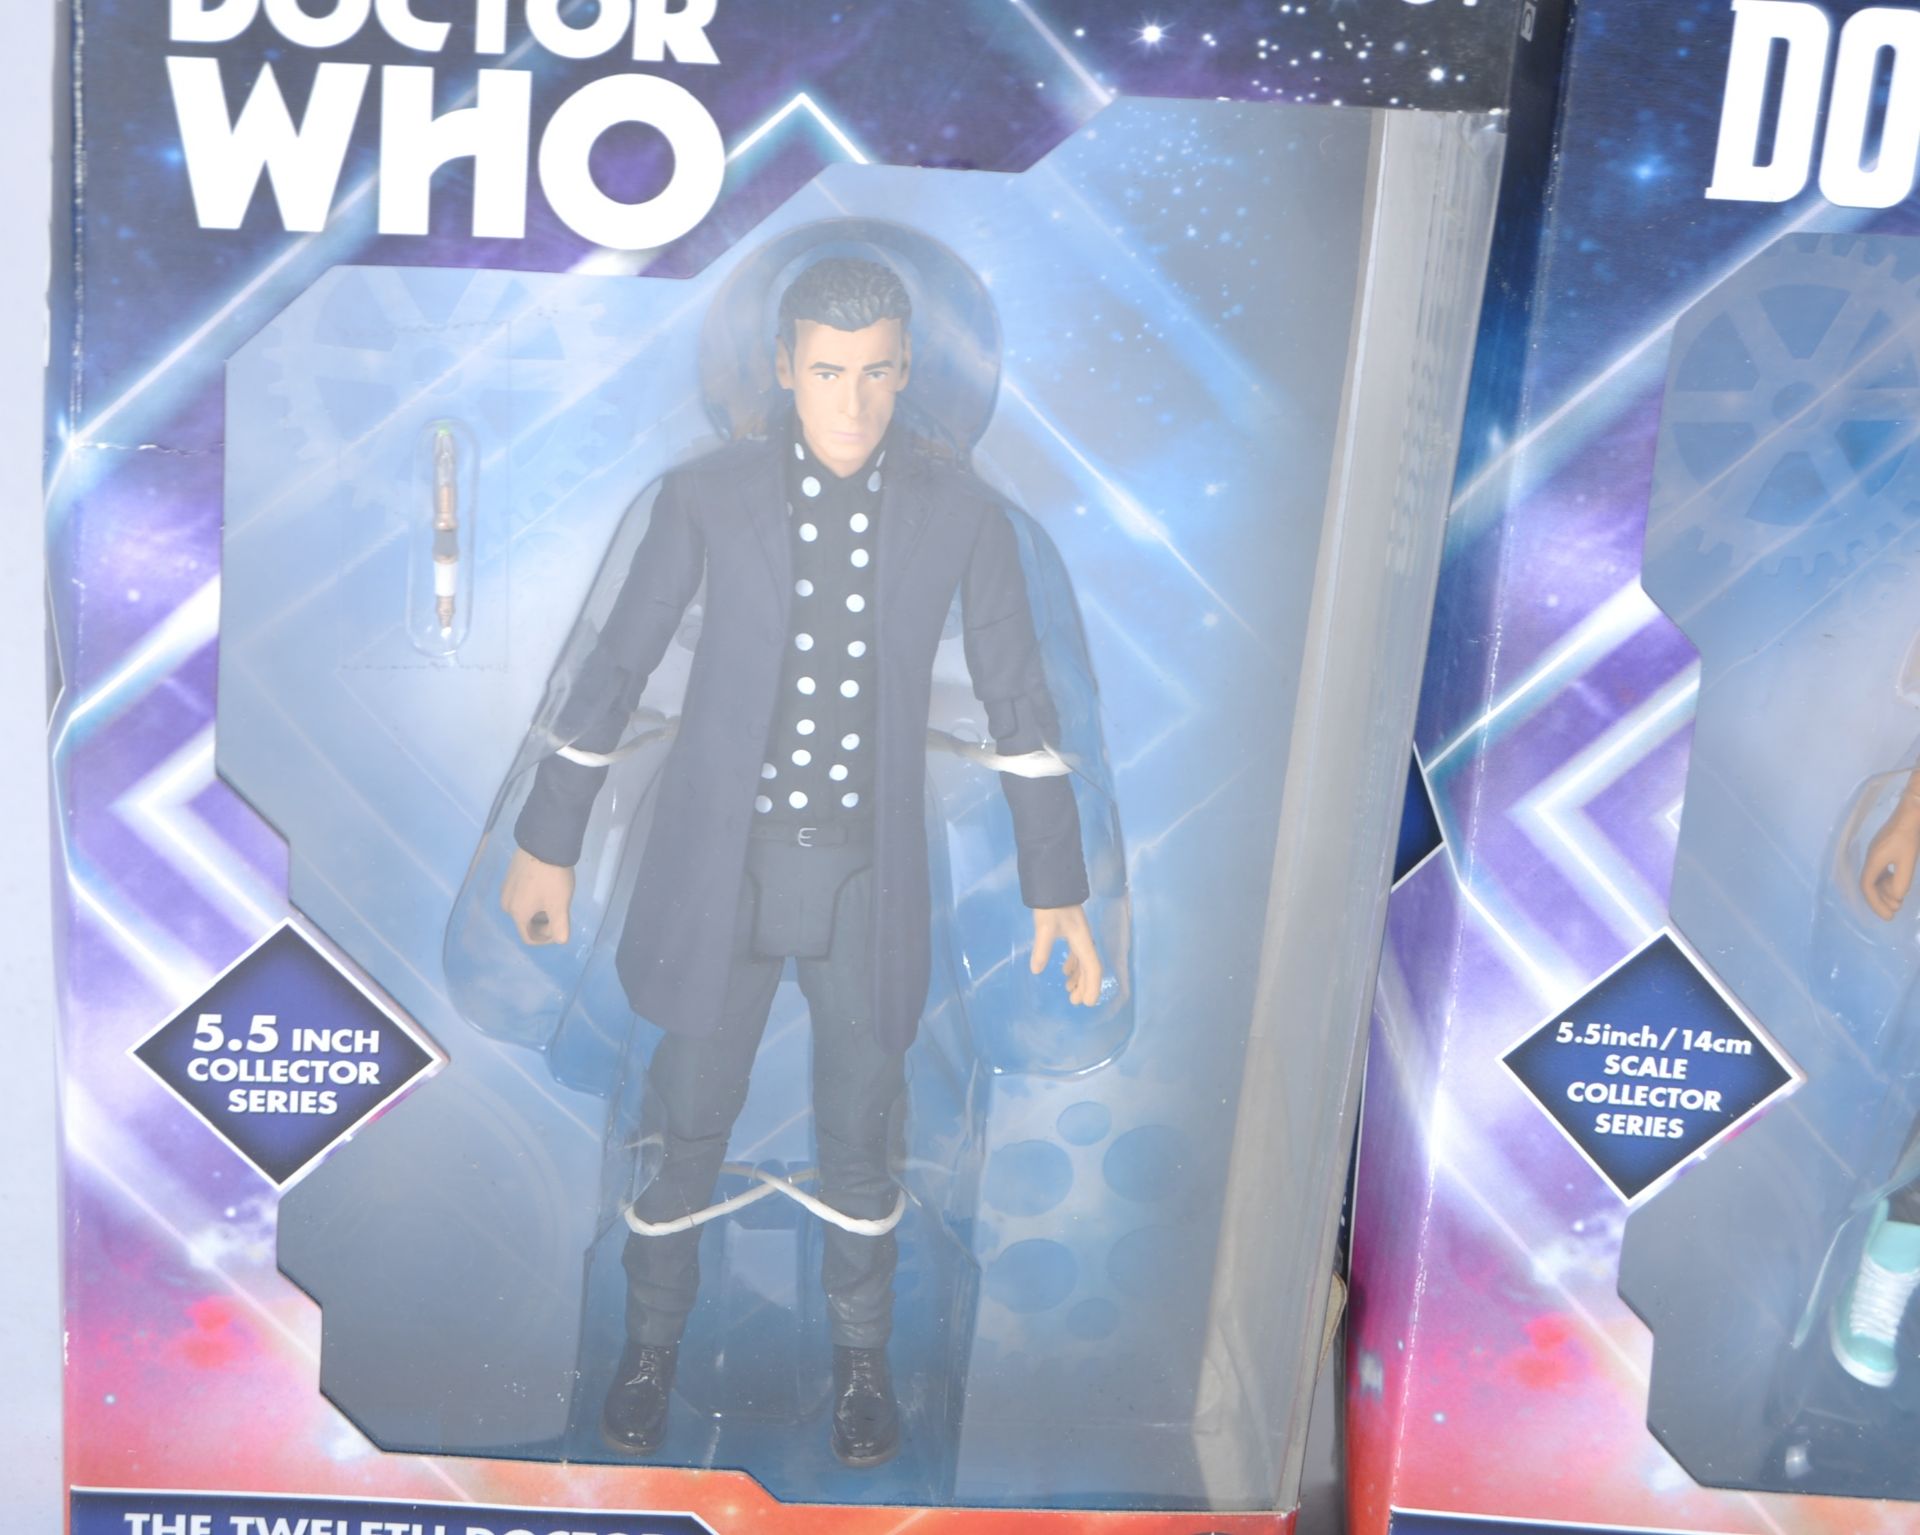 DOCTOR WHO - CHARACTER OPTIONS - TWELFTH DOCTOR ACTION FIGURES - Image 4 of 5